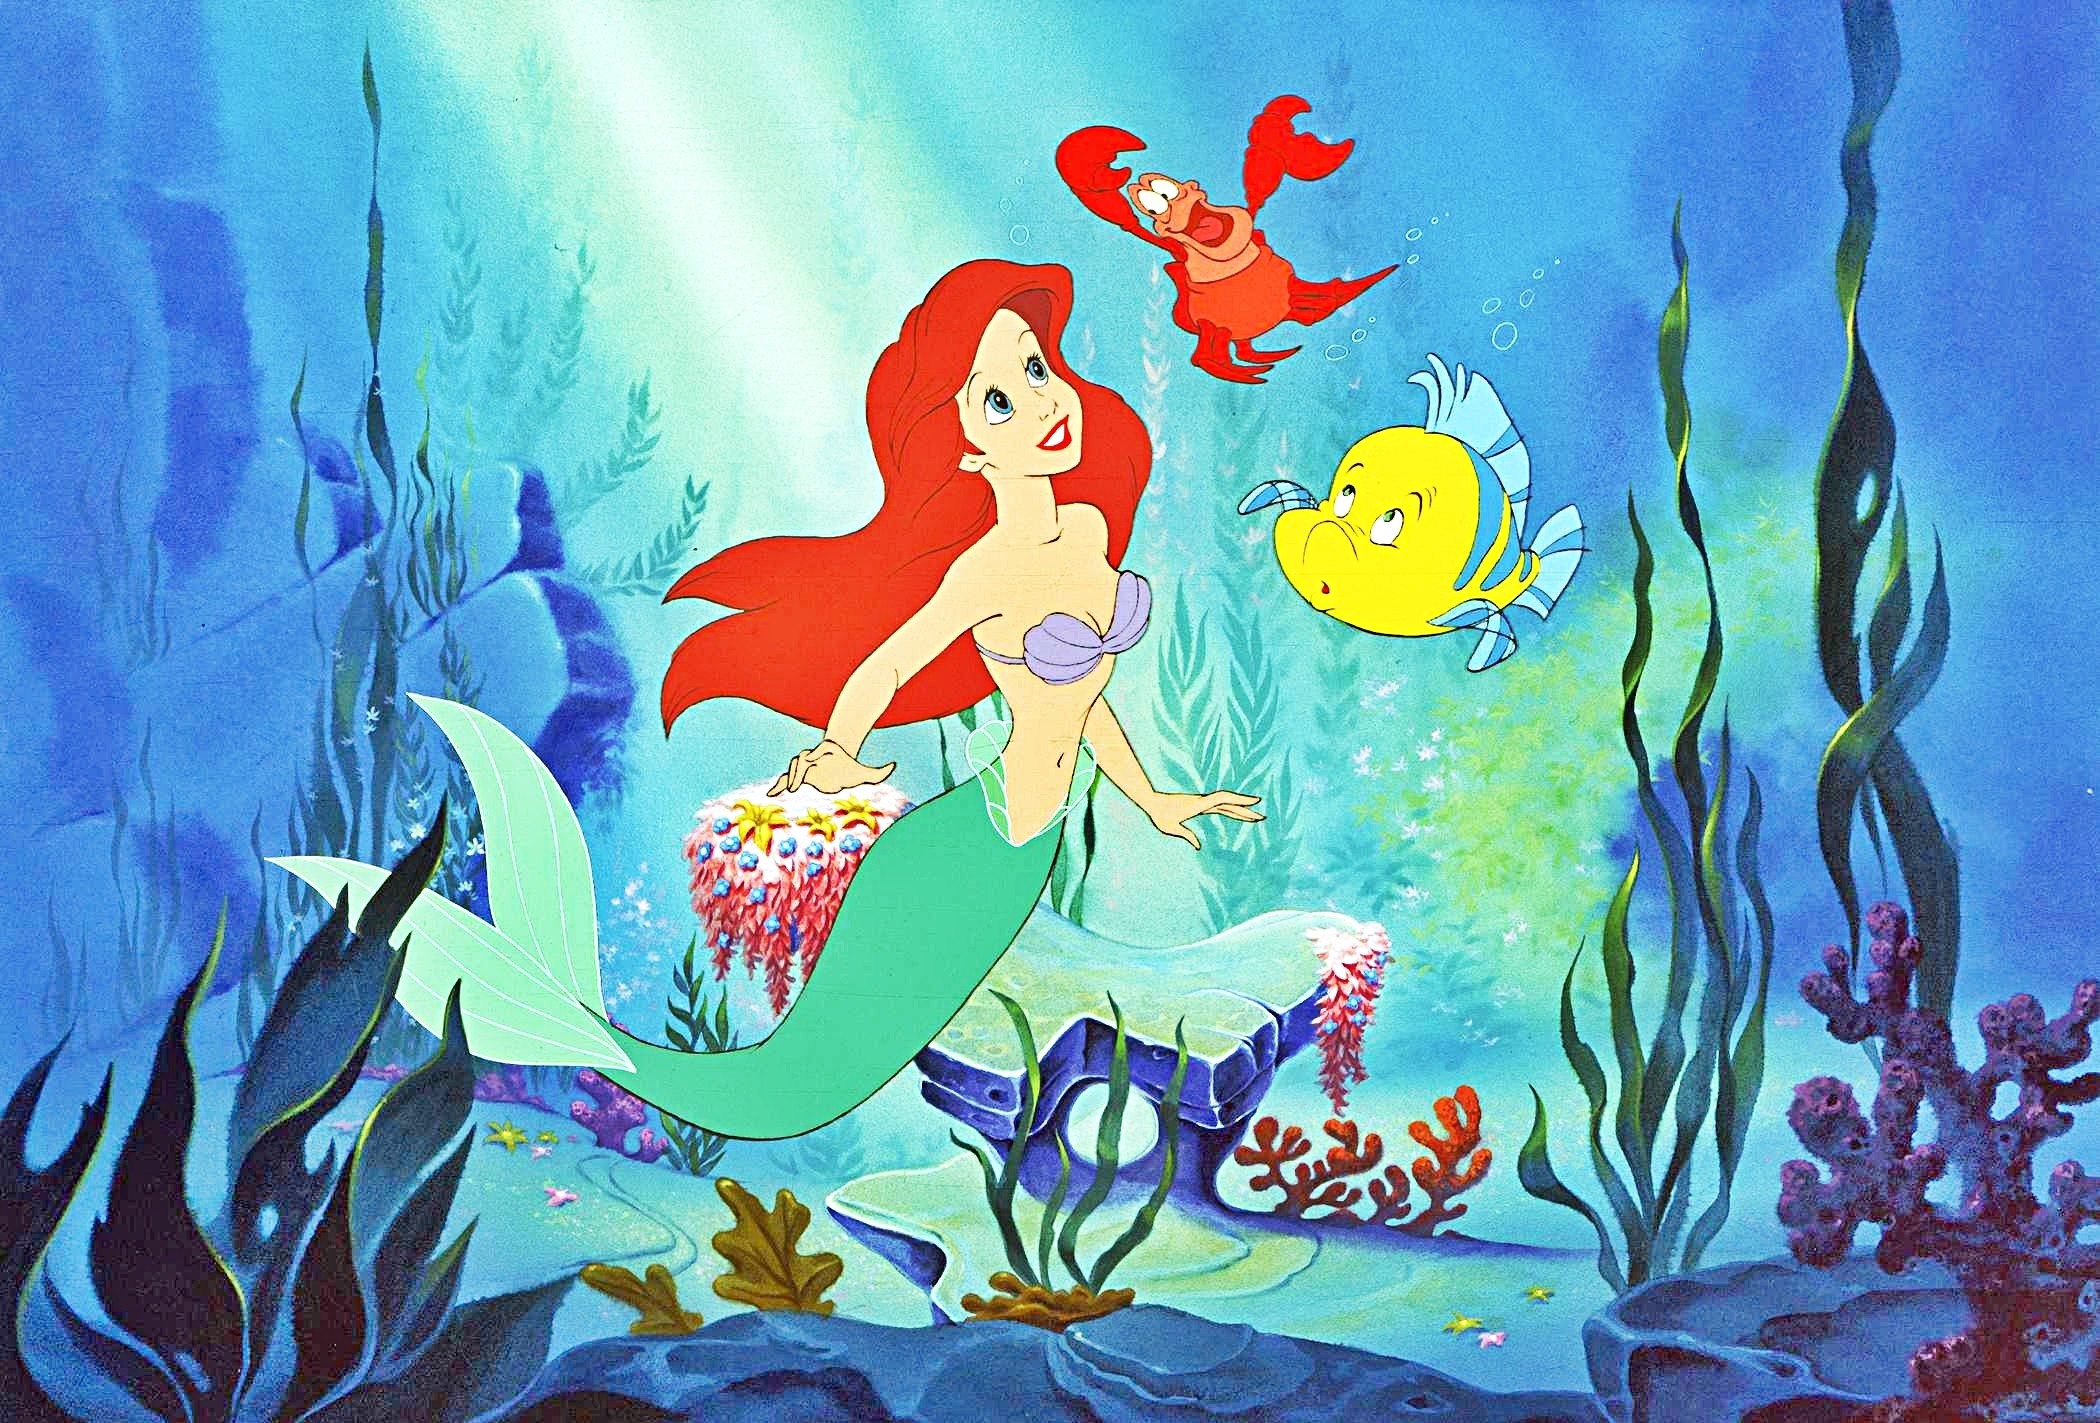 2100x1423 Walt Disney Production Cel of Princess Ariel, Sebastian and Flounder from "The  Little Mermaid" HD Wallpaper and background photos of Walt Disney  Production ...